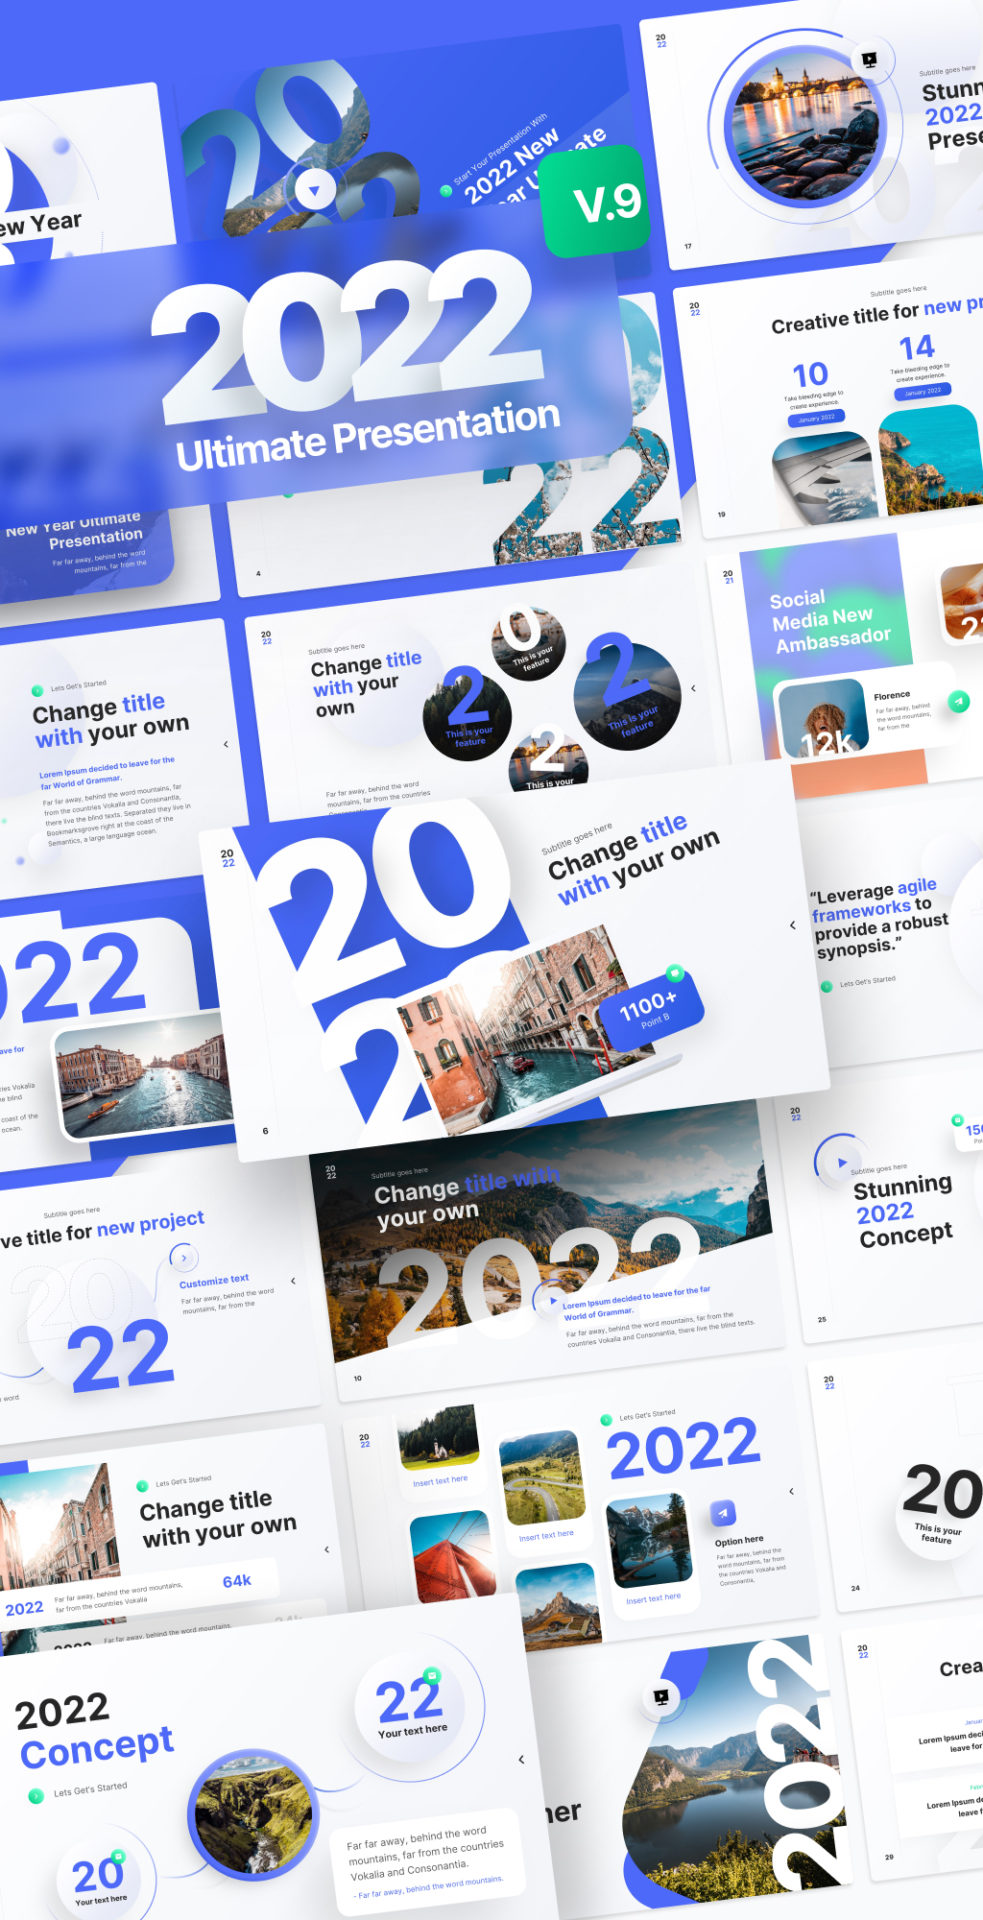 best powerpoint templates for 2022